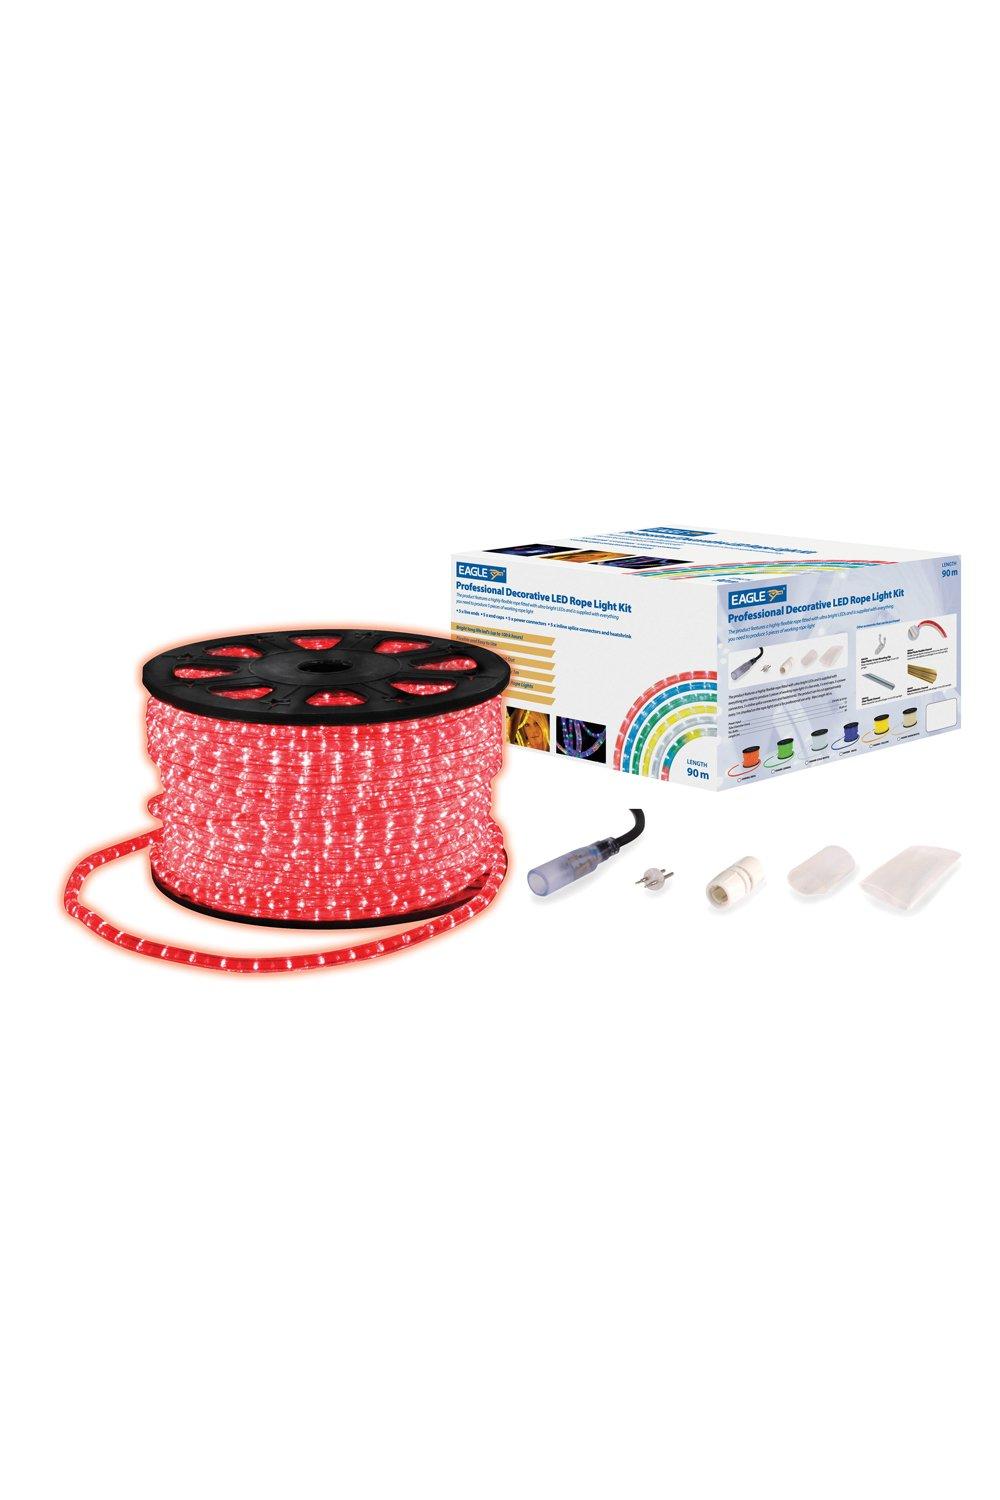 Static LED Rope Light Kit With Wiring Accessories Kit 90m Red